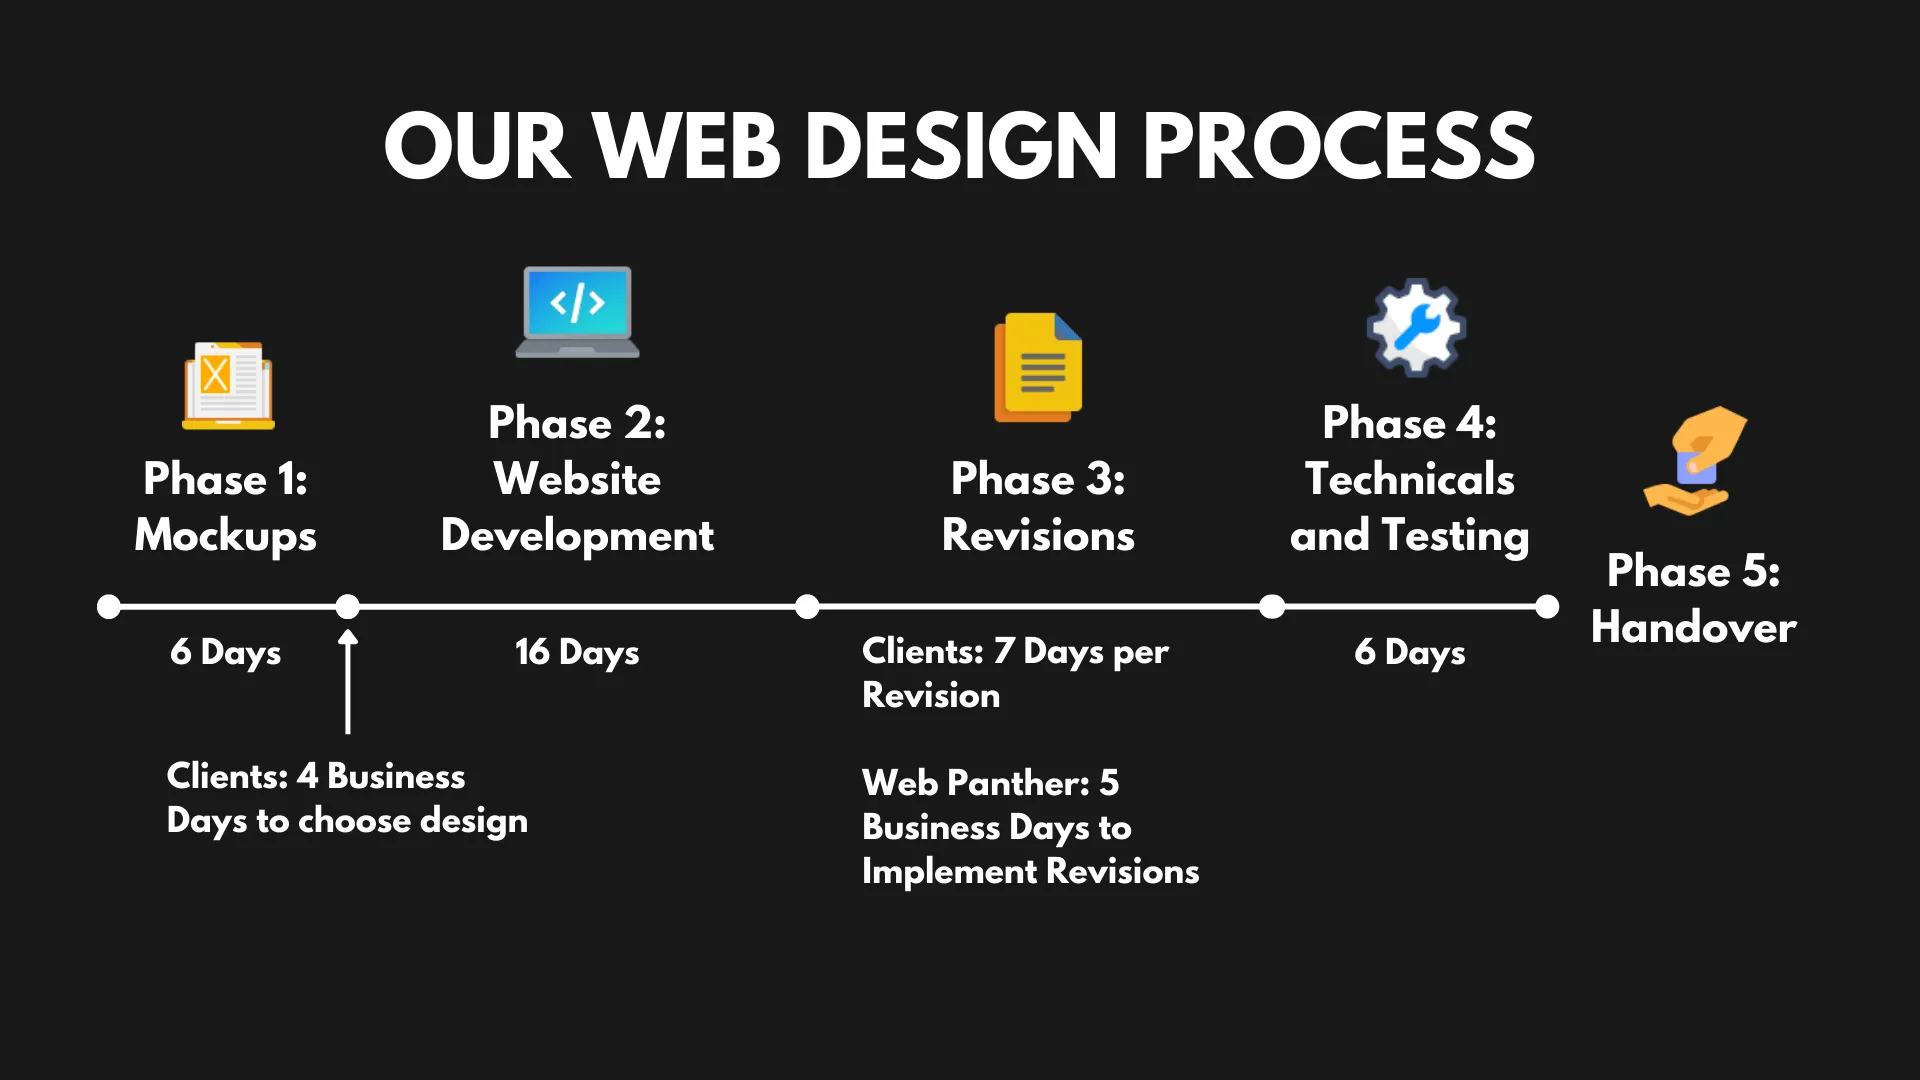 How long does it take to design a website?